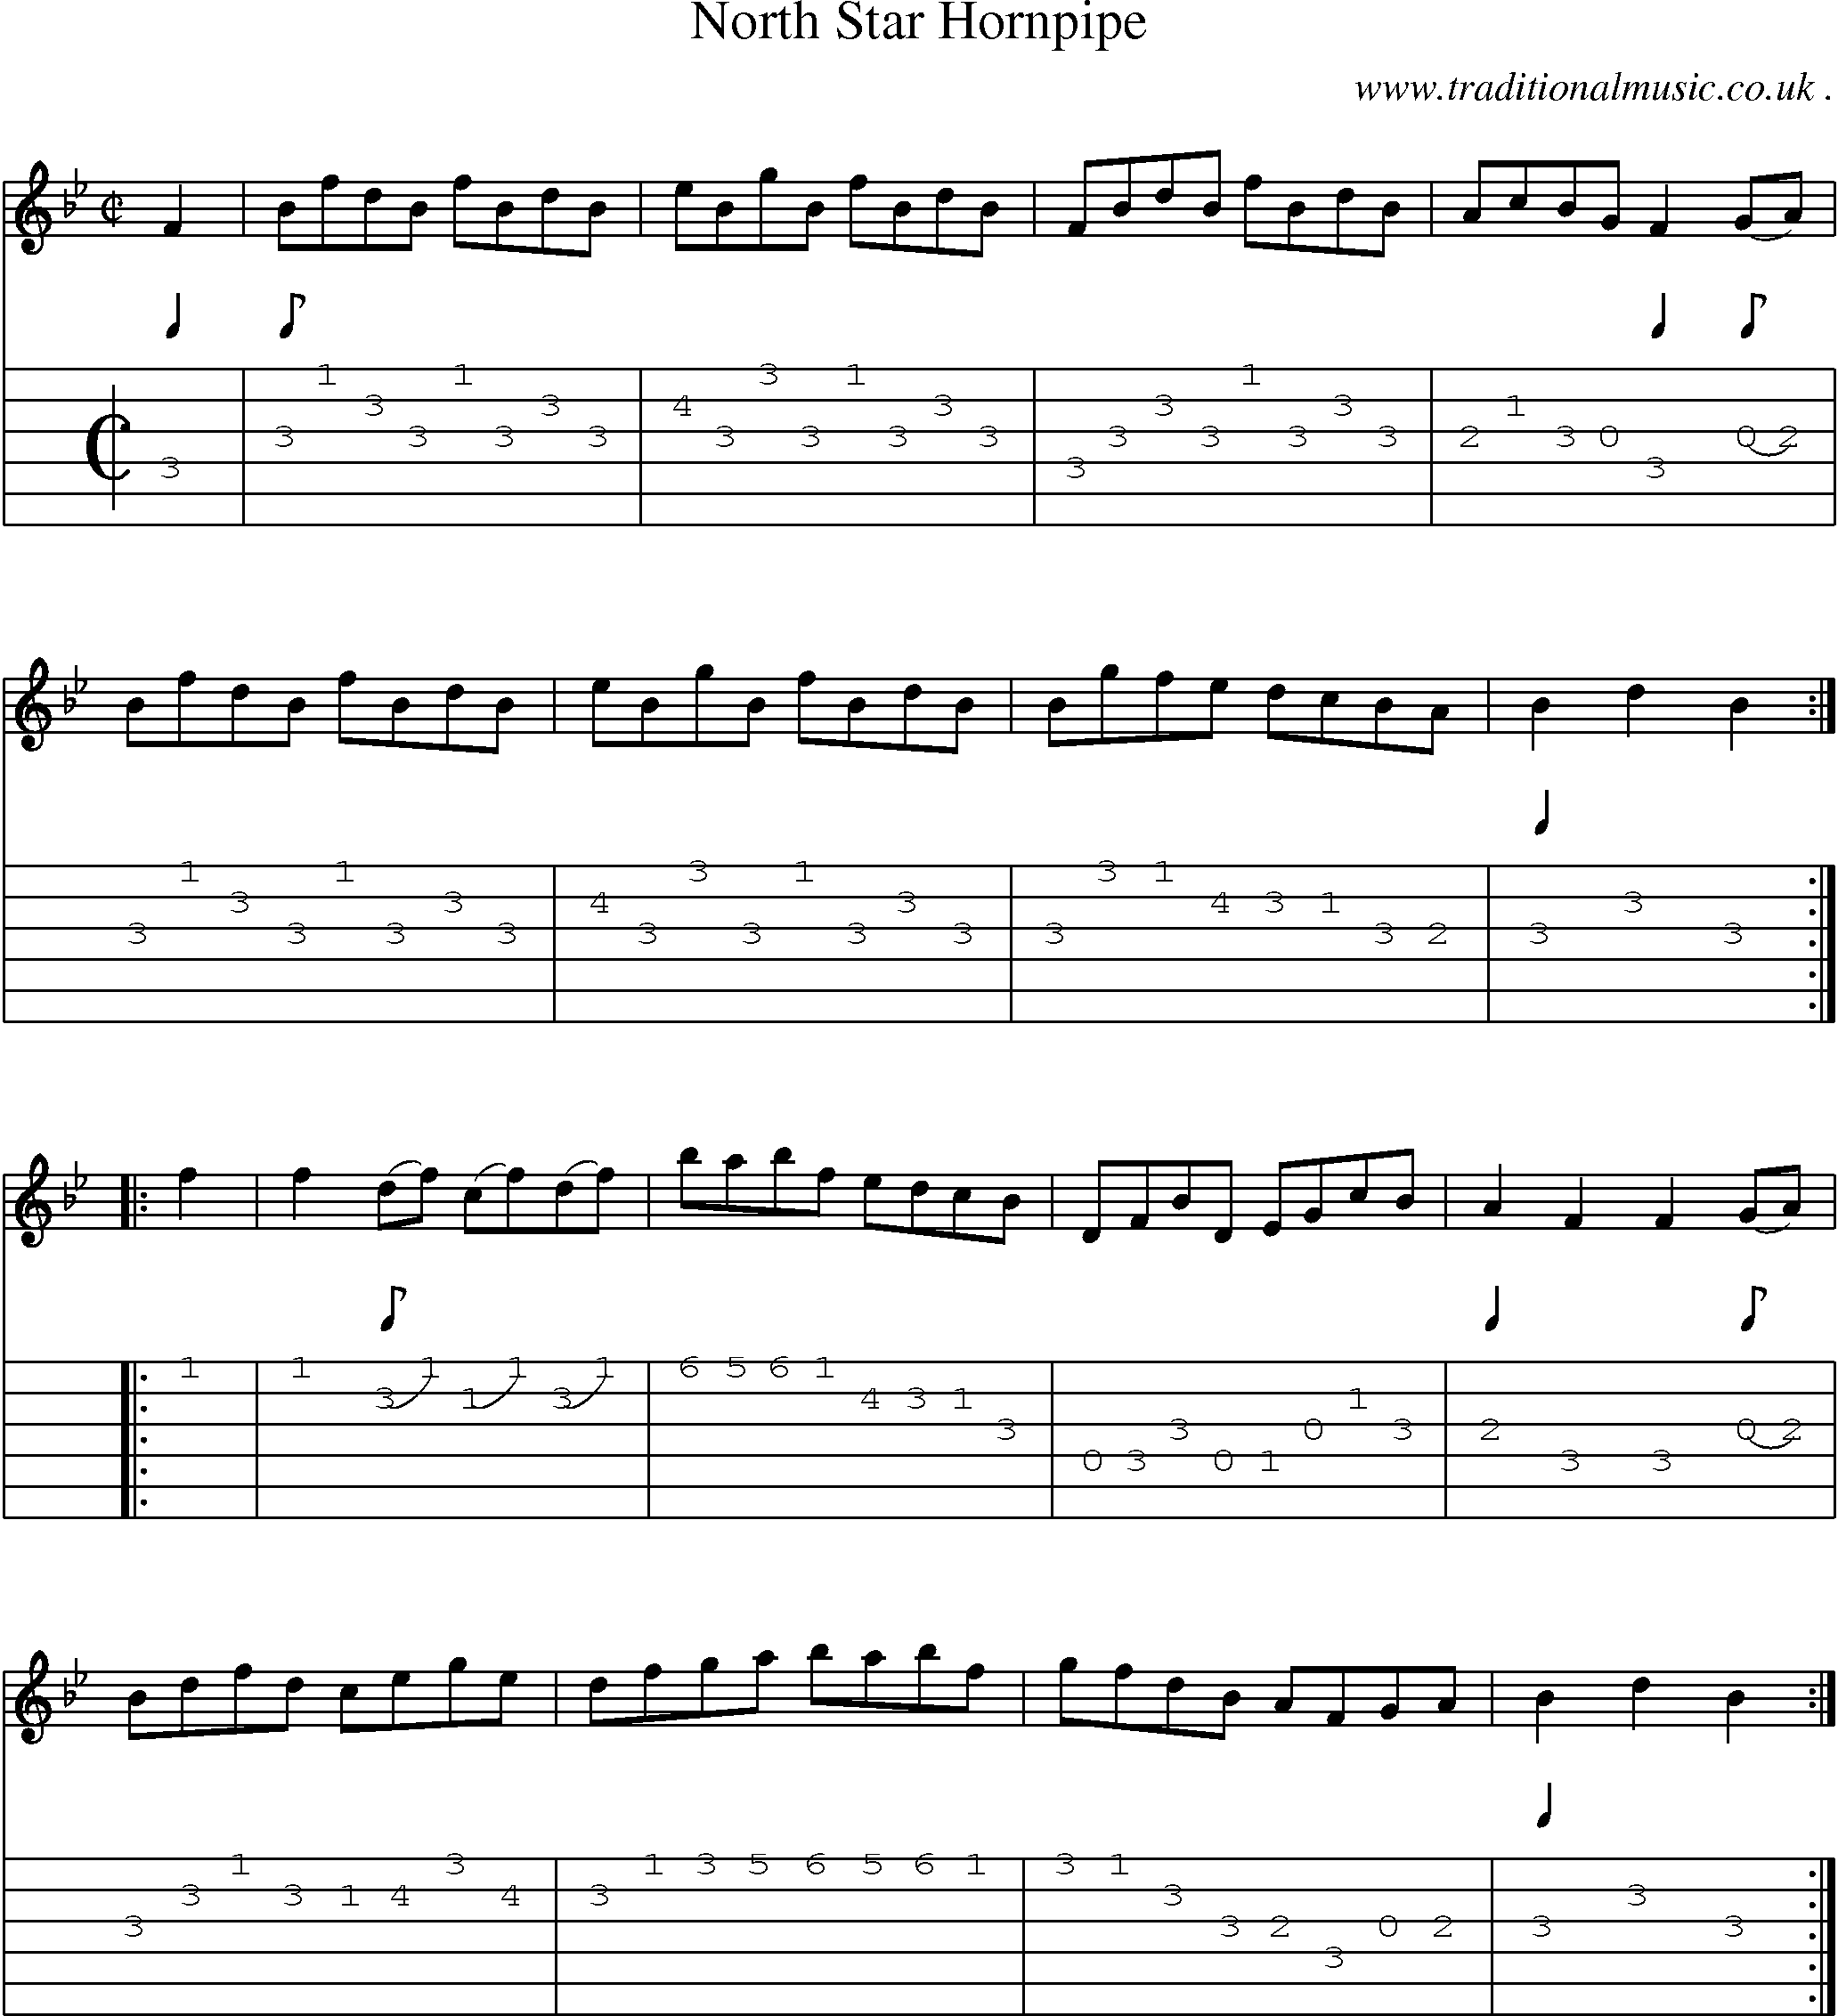 Sheet-Music and Guitar Tabs for North Star Hornpipe